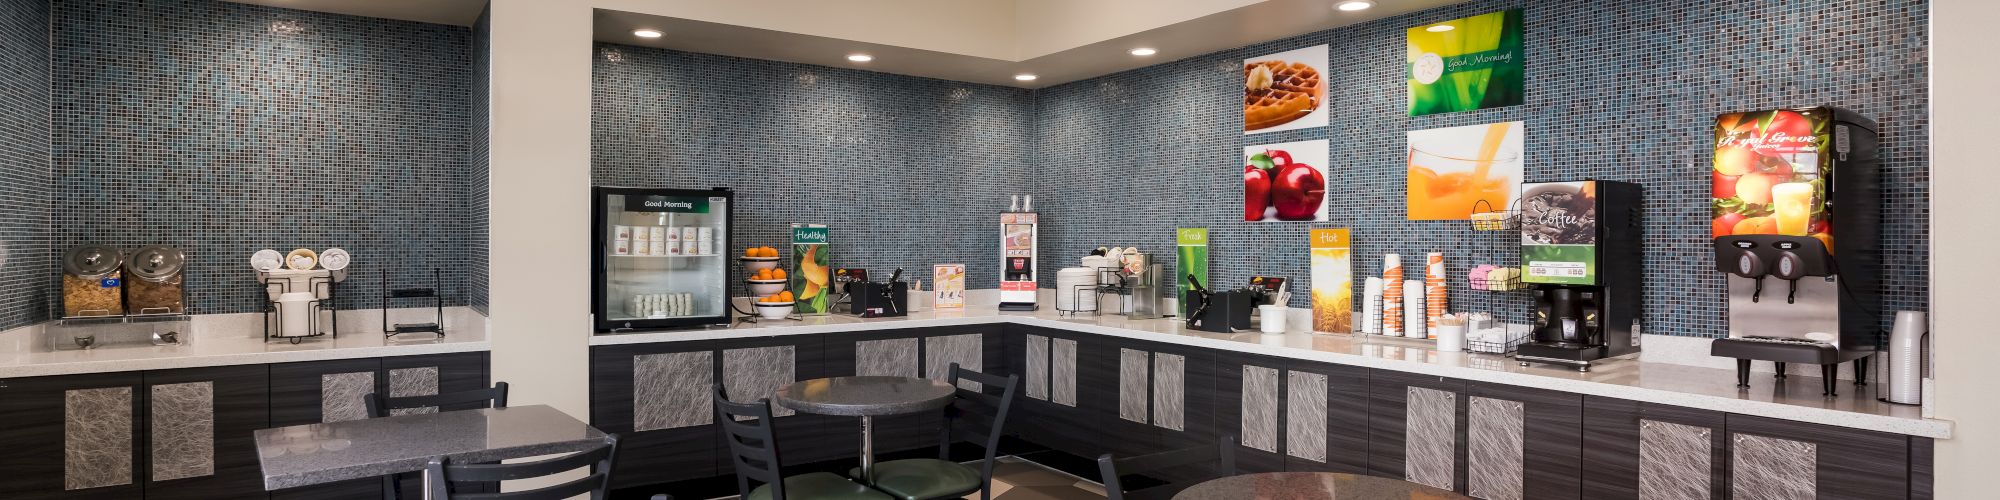 A brightly lit self-serve breakfast area in a hotel with a variety of food and drink options, including a cereal dispenser, coffee maker, and juice machine.